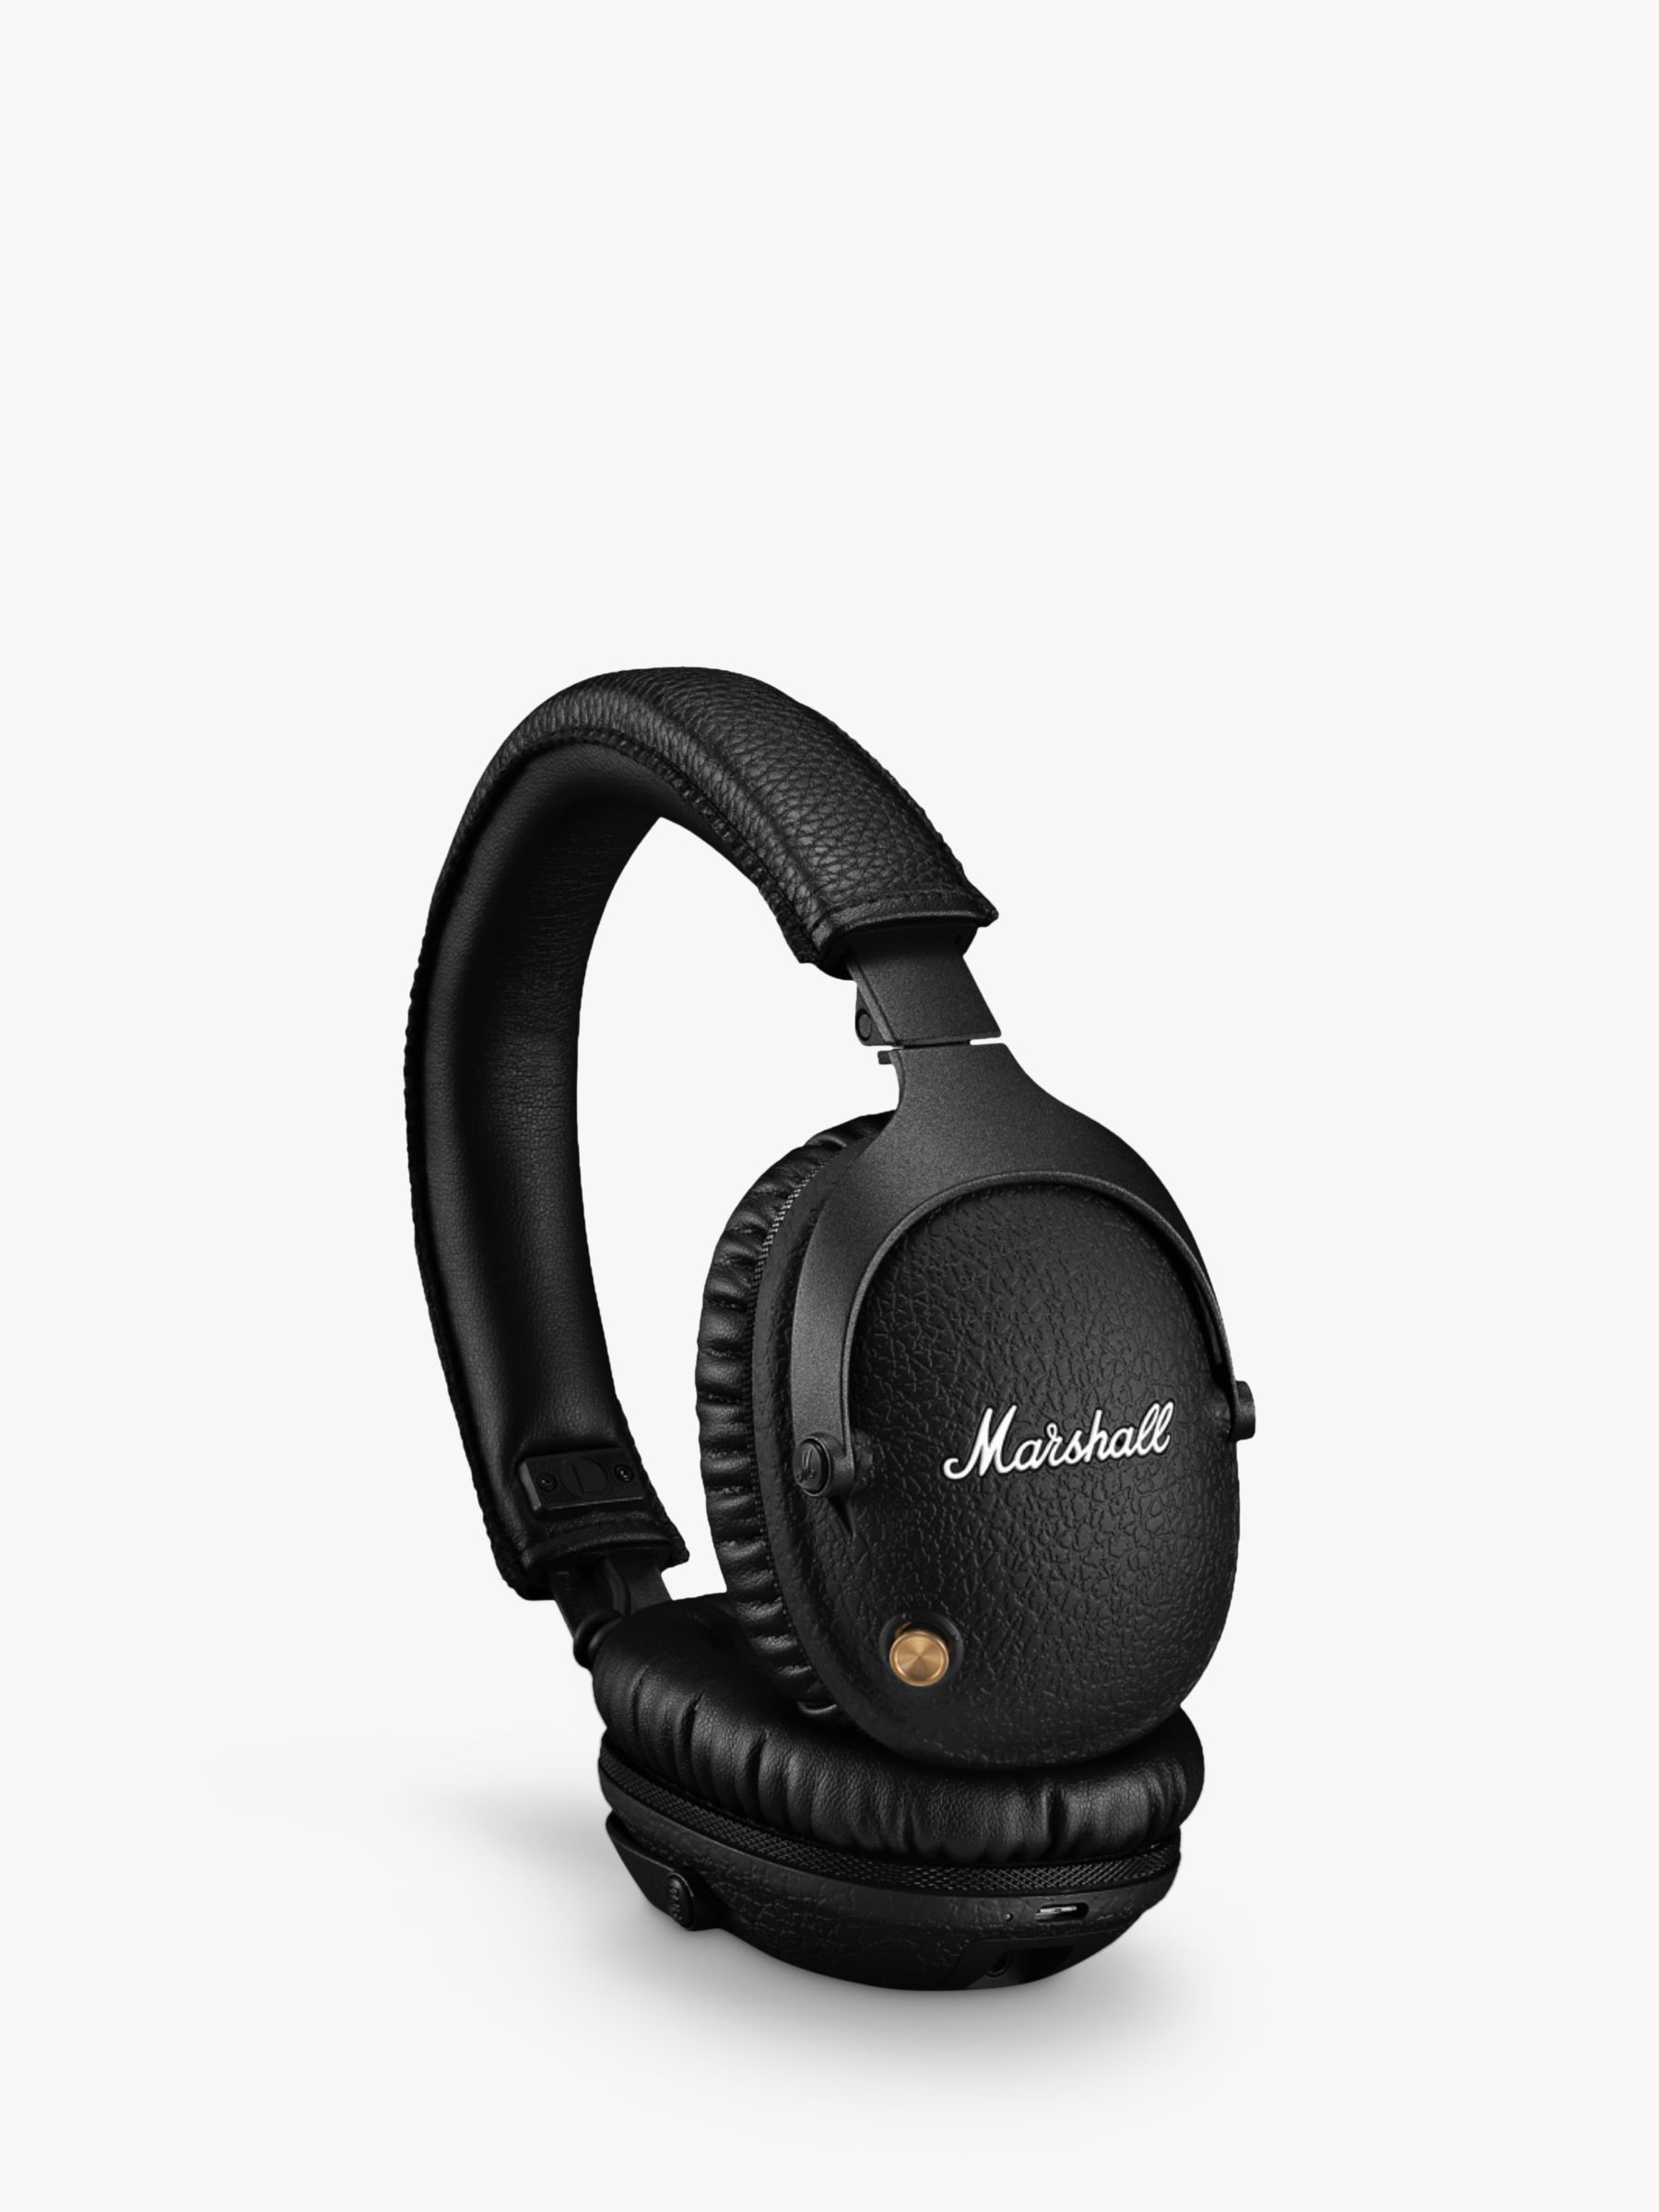 Marshall Monitor II ANC Noise Cancelling Bluetooth Over-Ear with Mic/Remote, Black